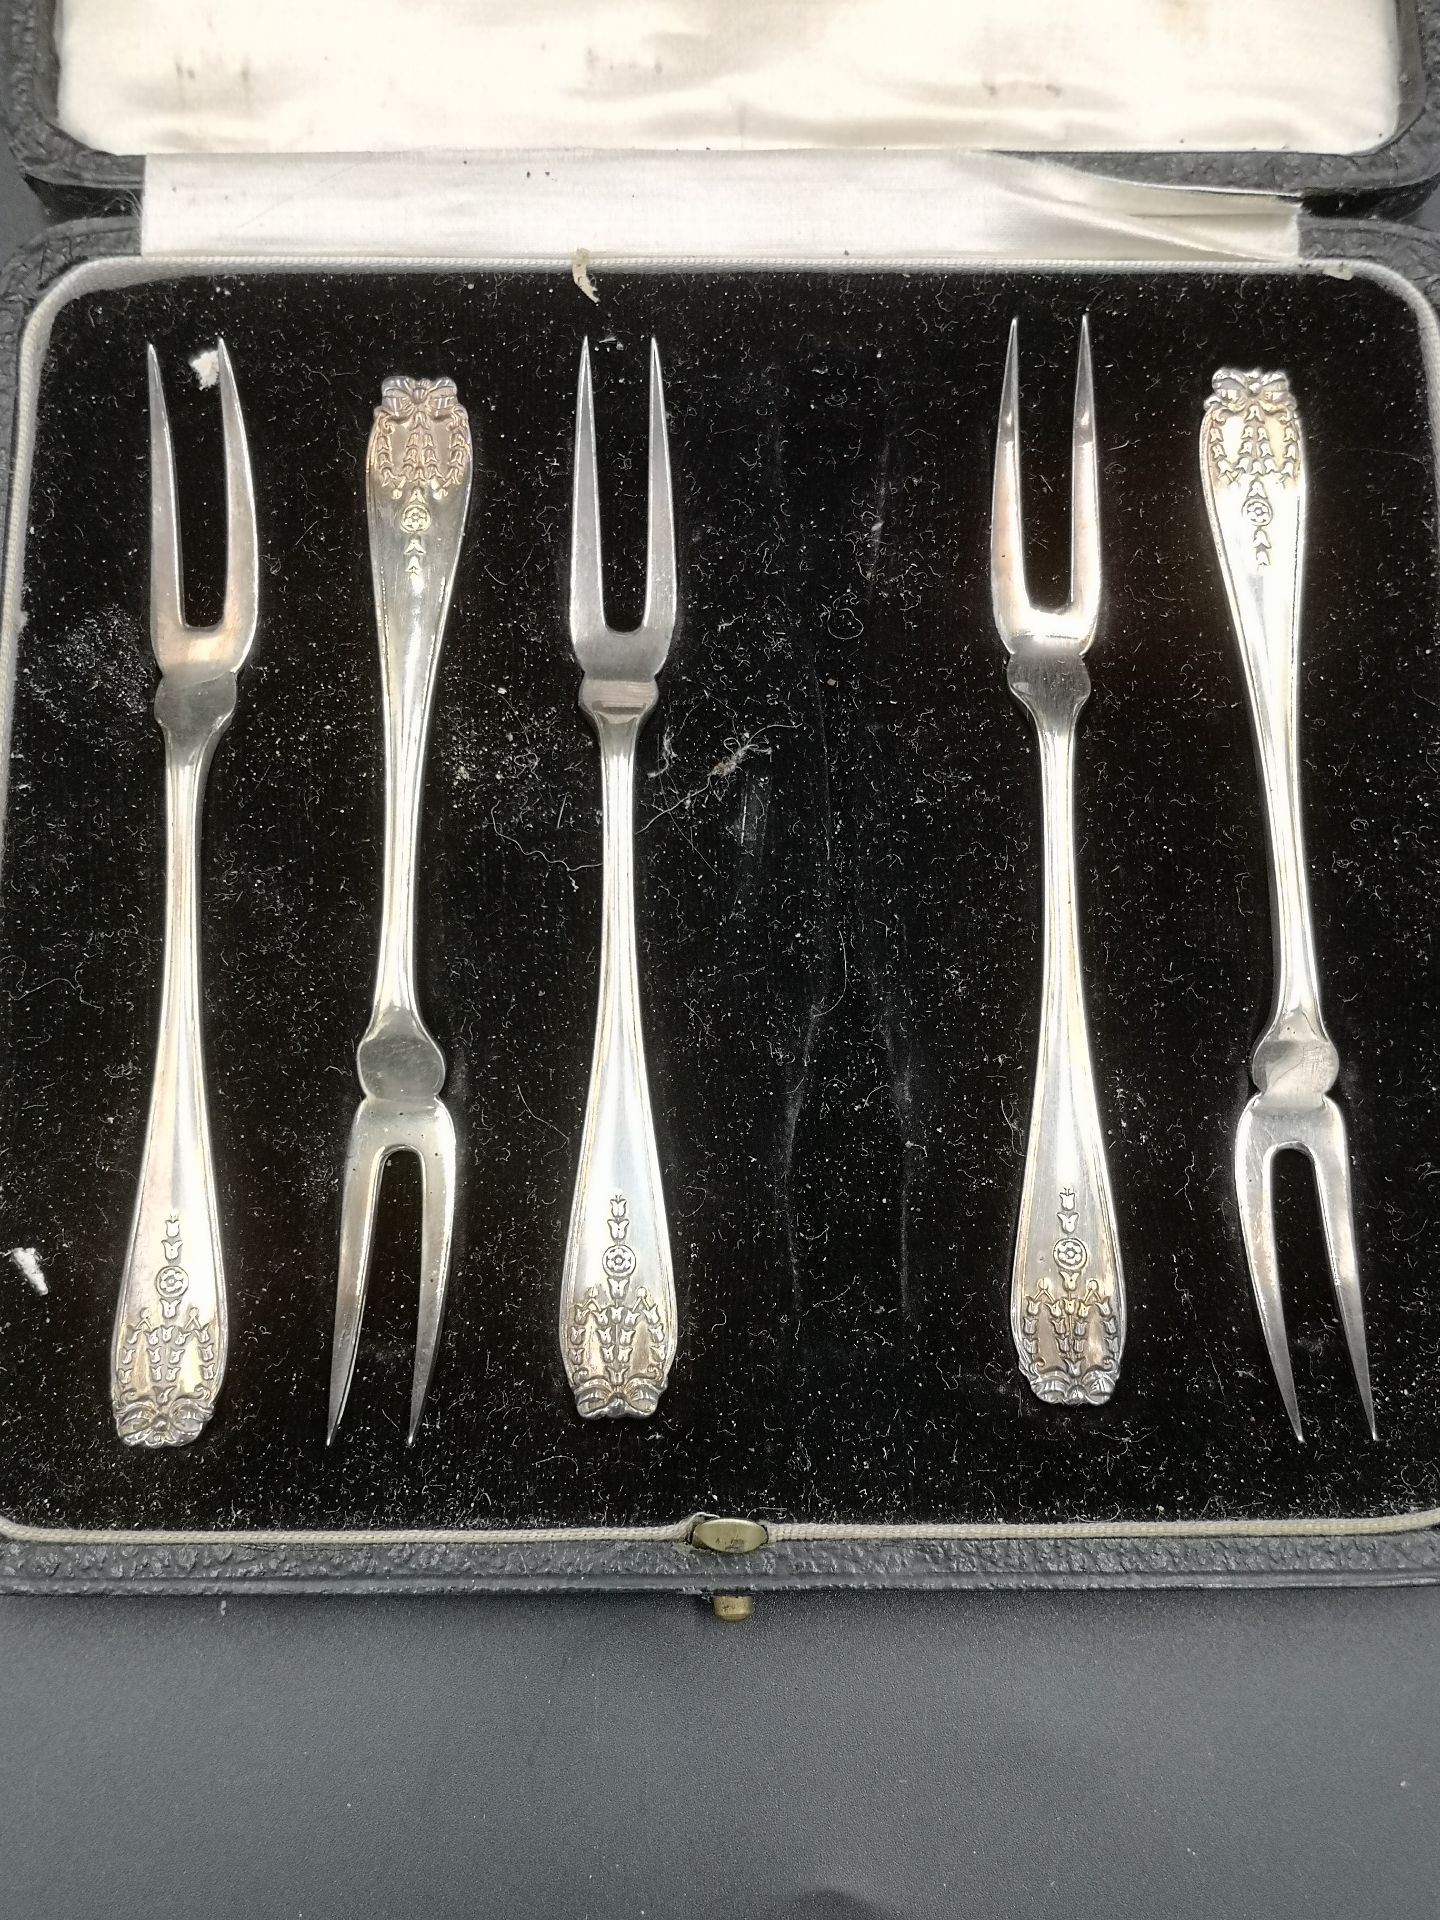 Set of six silver and enamel tea spoons together with silver handled knives and forks - Image 4 of 4